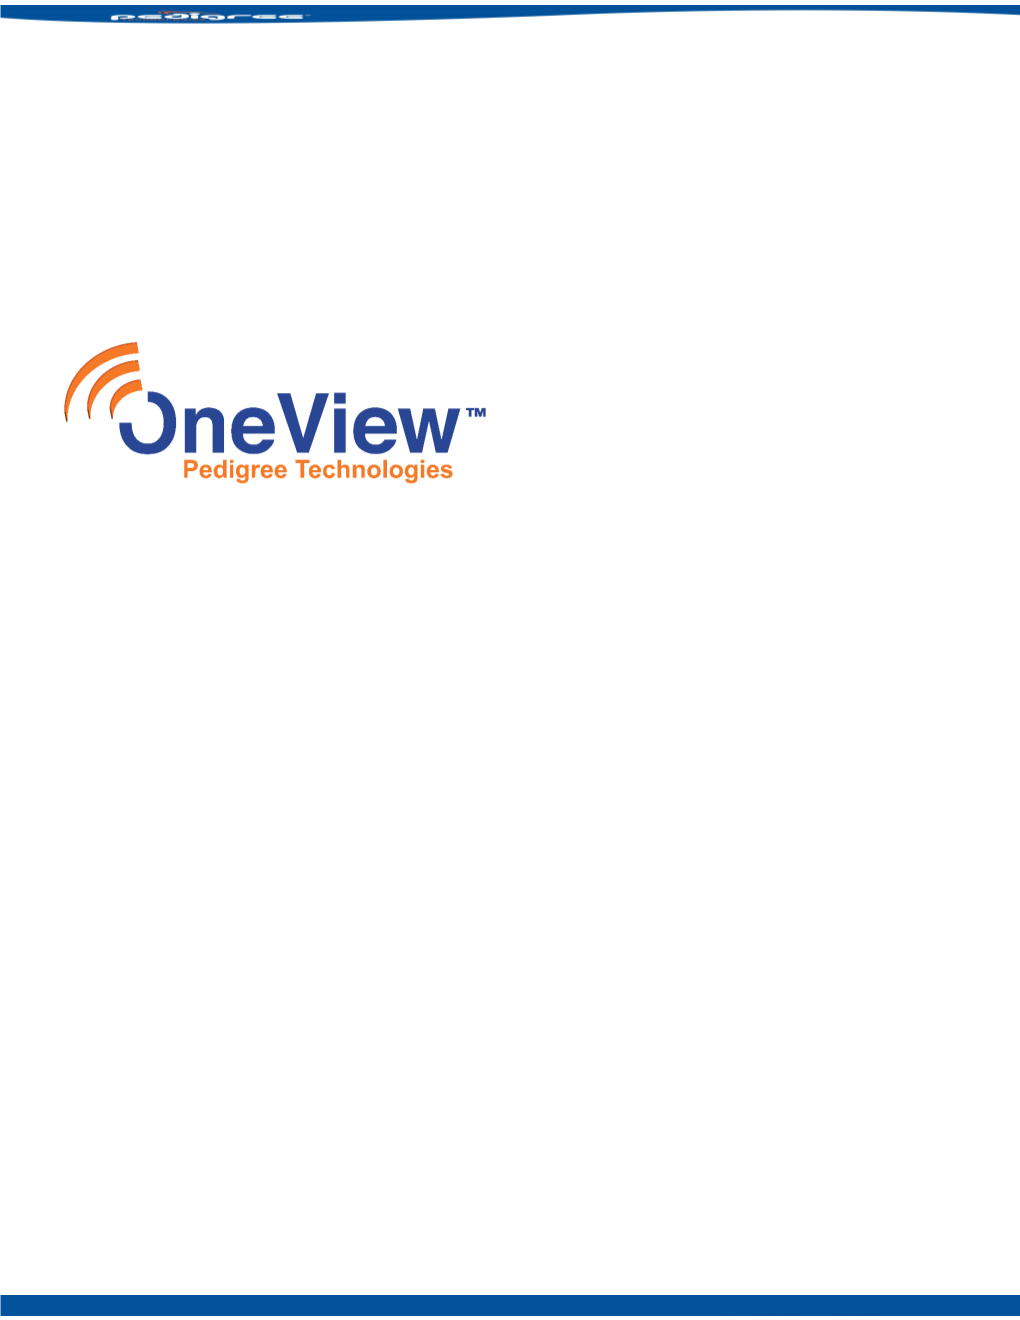 Driver Vehicle Inspection Reports (DVIR) in Oneview